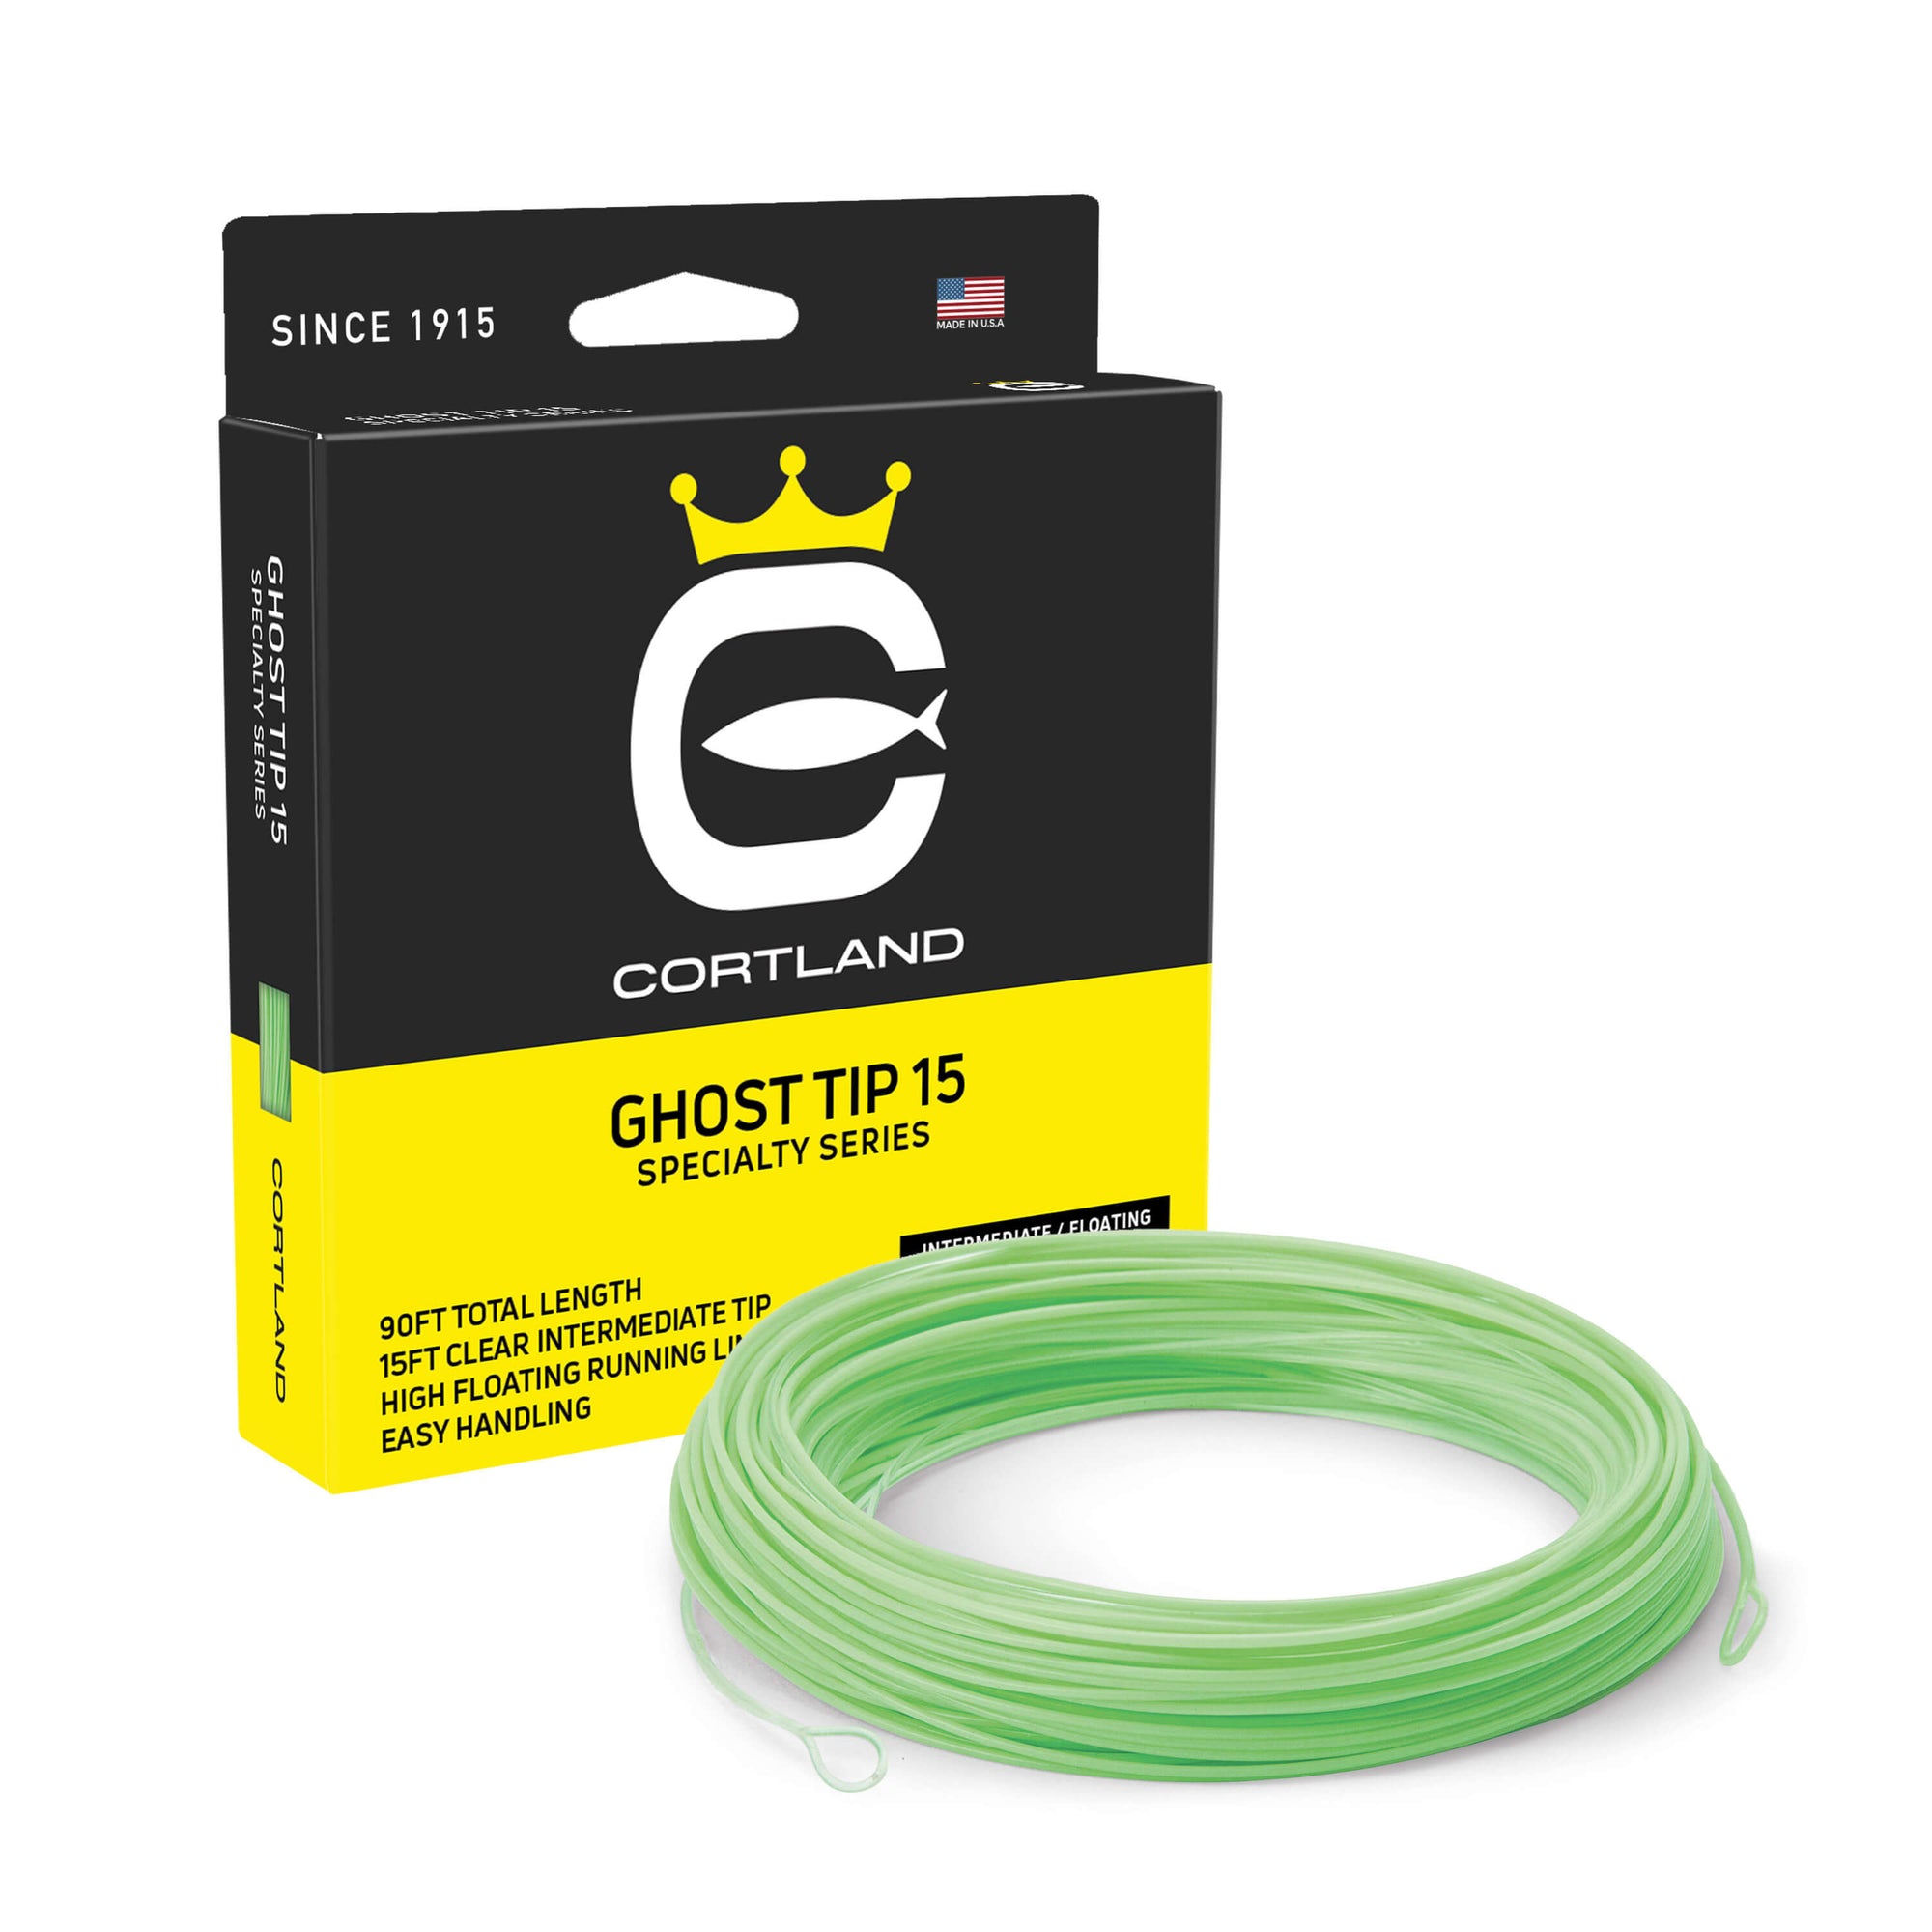 Ghost Tip 15 Fly Line and Box. The coil is clear and mint green. The box is black and yellow. 